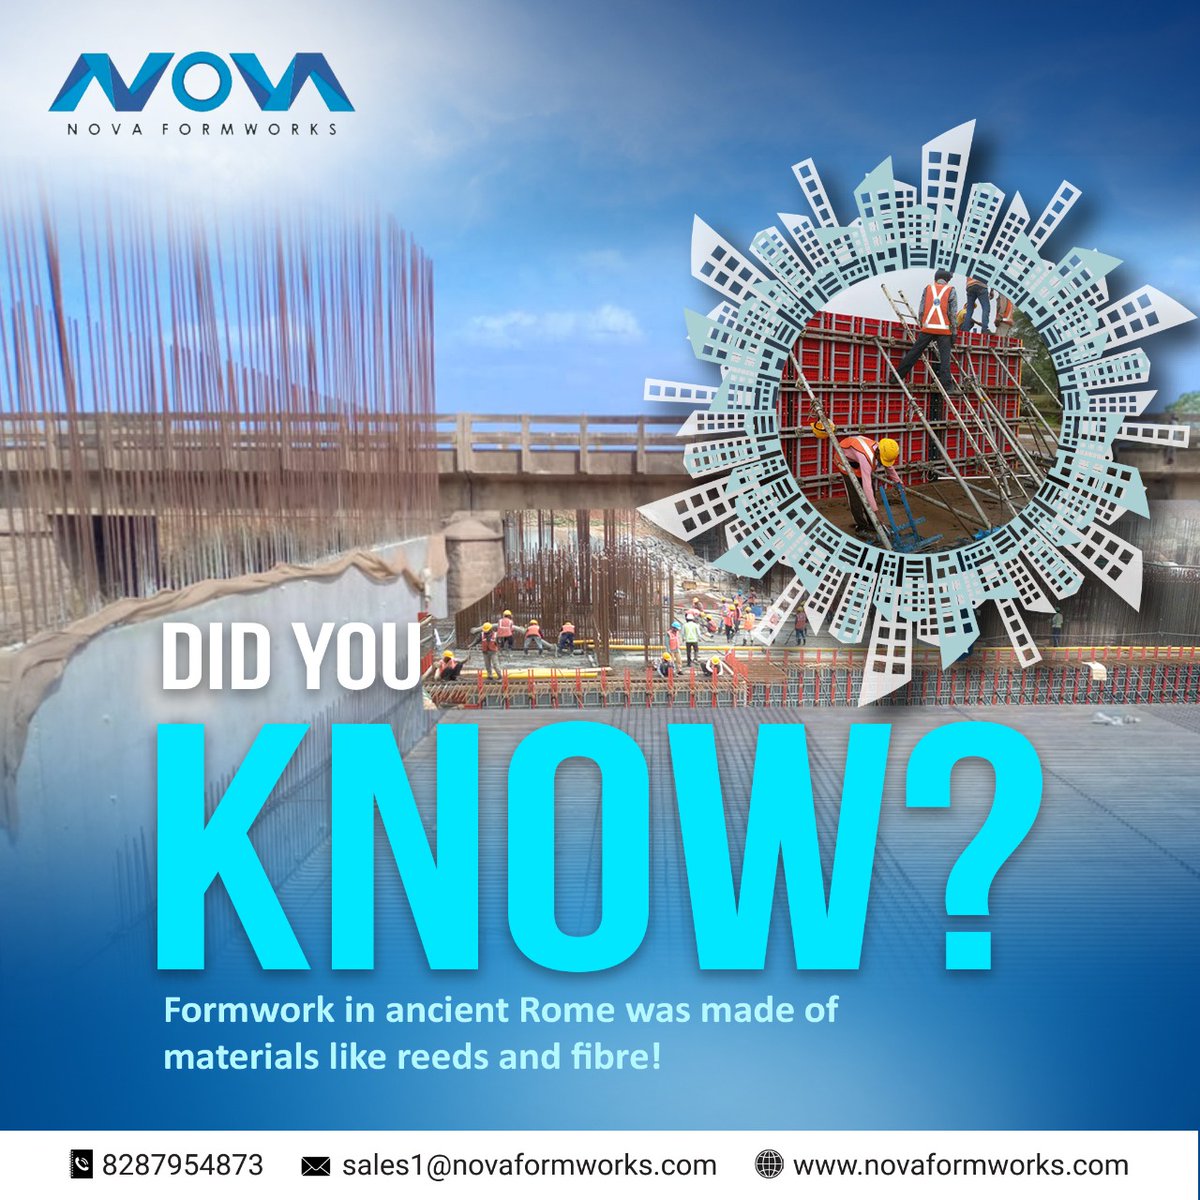 Formwork in ancient Rome was made of reeds and fibre!
.
.
.
#formworkuse #shuttering #ecofriendly #lightweightpanels #ecofriendlypanels #steelformwork #aluminumformworks #aluminium #aluminumformworks #indianscaffolding #constructionsite #construction #delhi #constructionindelhi